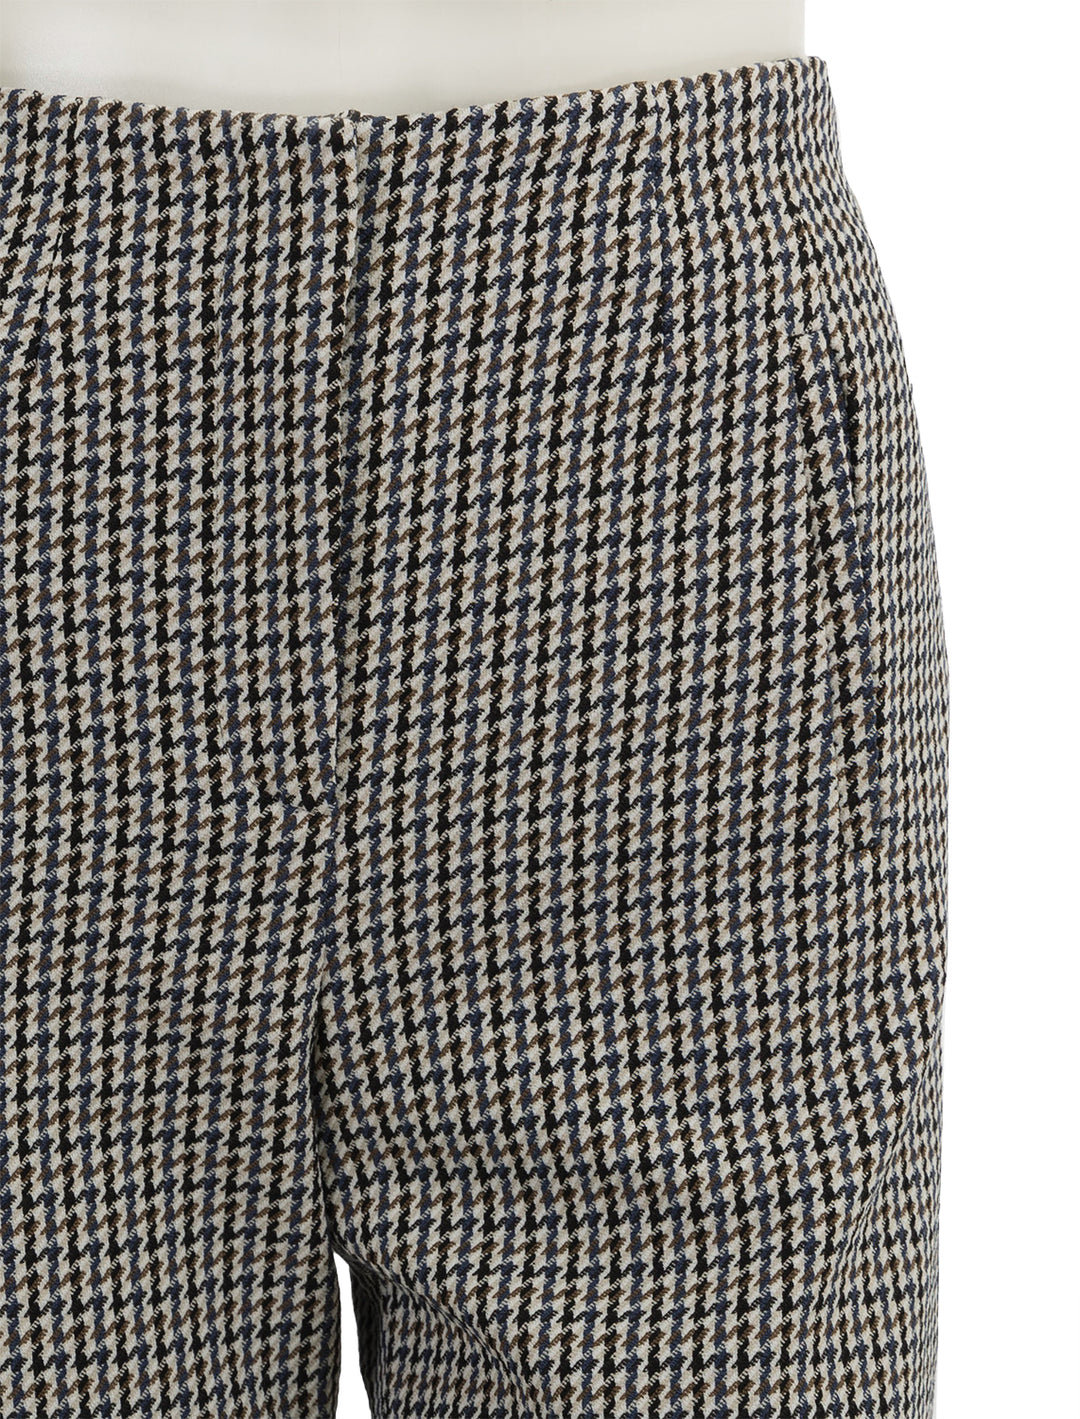 Close-up view of Veronica Beard's dova pant in multi check.